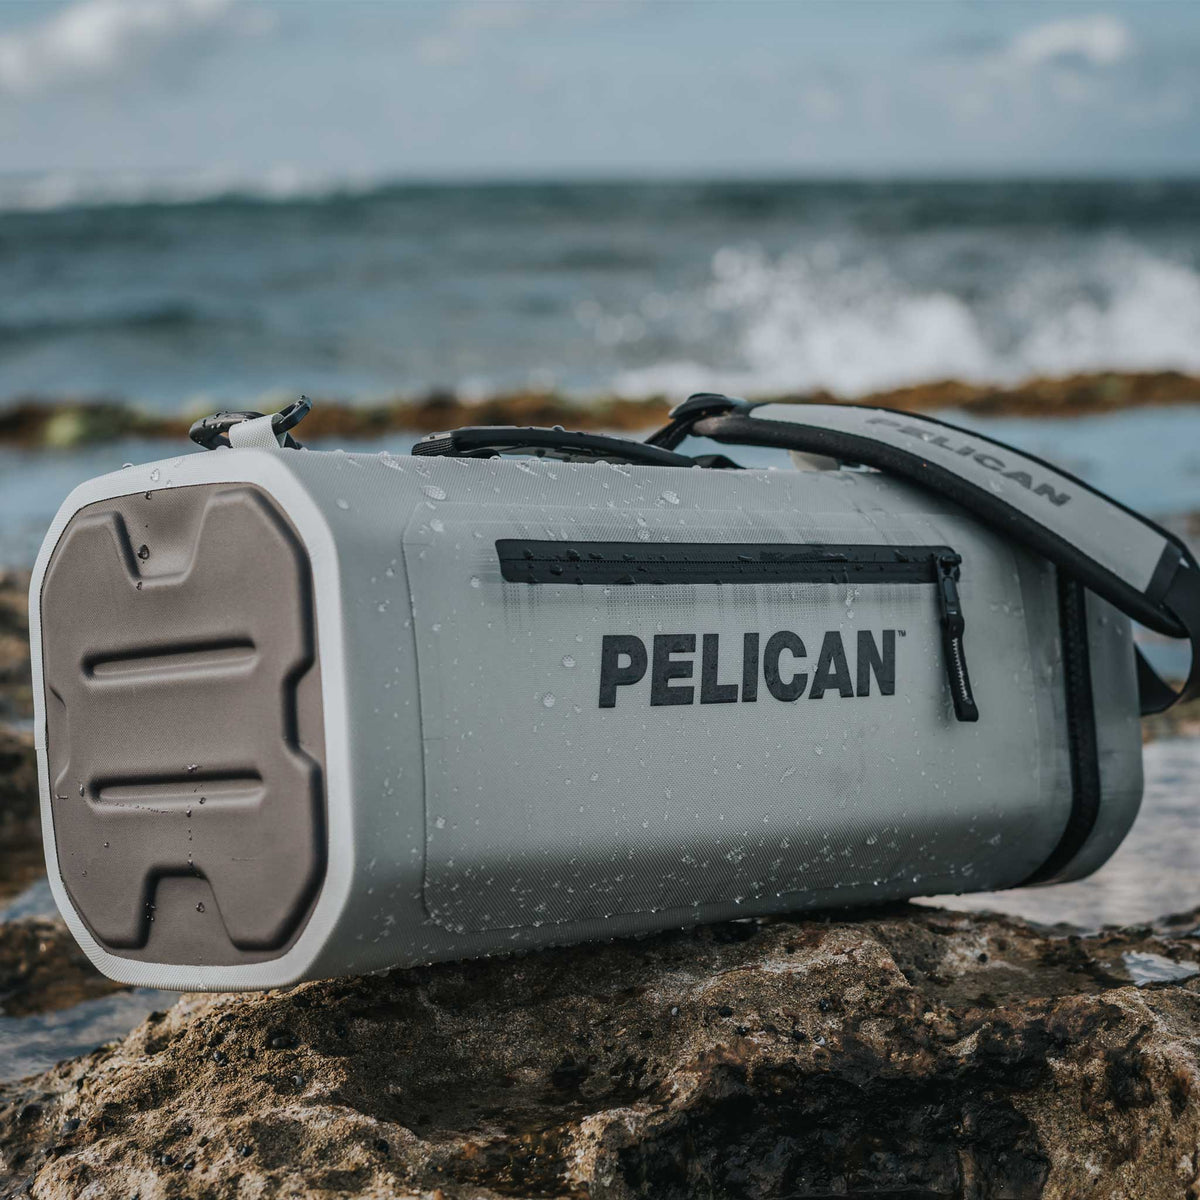 Pelican™ Dayventure Sling Soft Cooler on the beach splashed with water